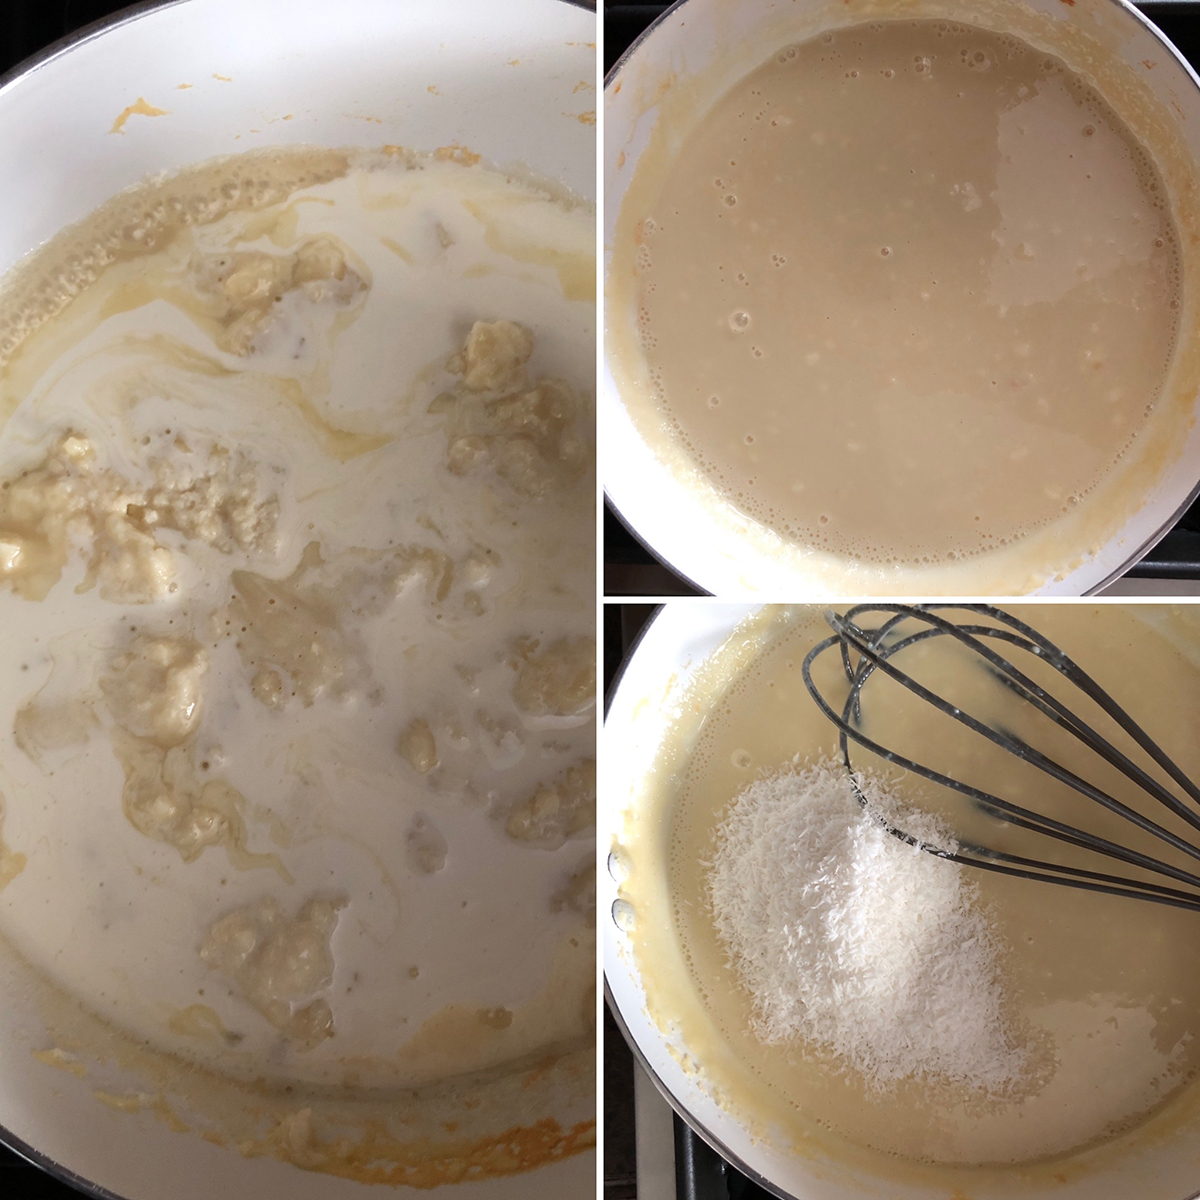 Step by step photos showing the cooking of cheese, condensed milk and desiccated coconut